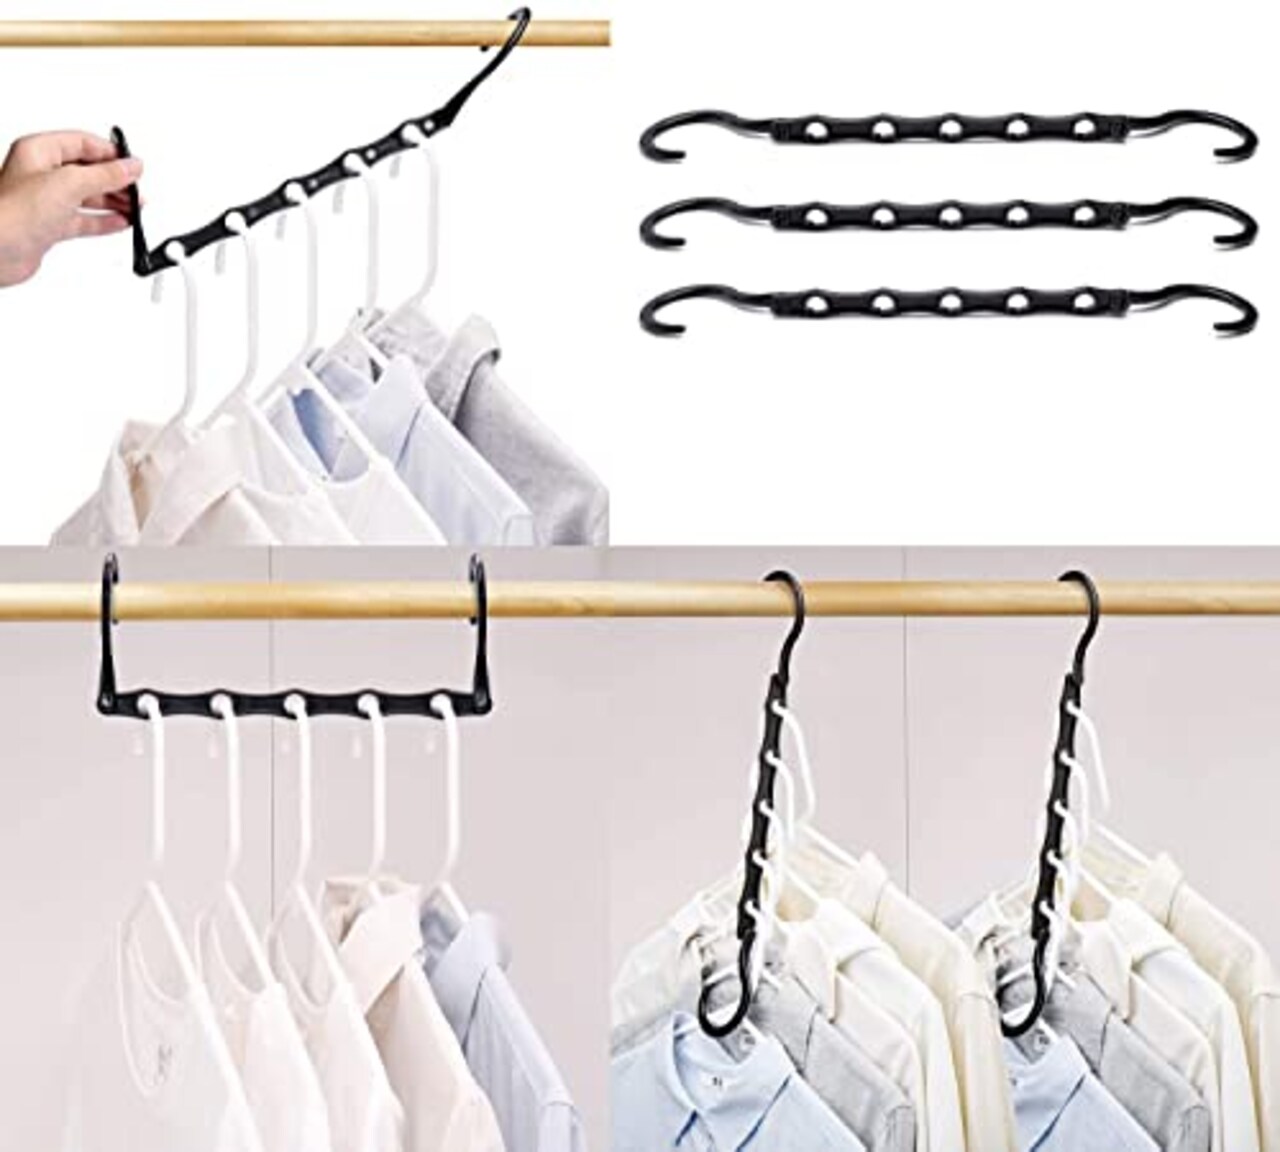 HOUSE DAY Black Magic Space Saving Hangers, Premium Smart Hanger Hooks,  Sturdy Cascading Hangers with 5 Holes for Heavy Clothes, Closet Organizers  and Storage, College Dorm Room Essentials 10 Pack